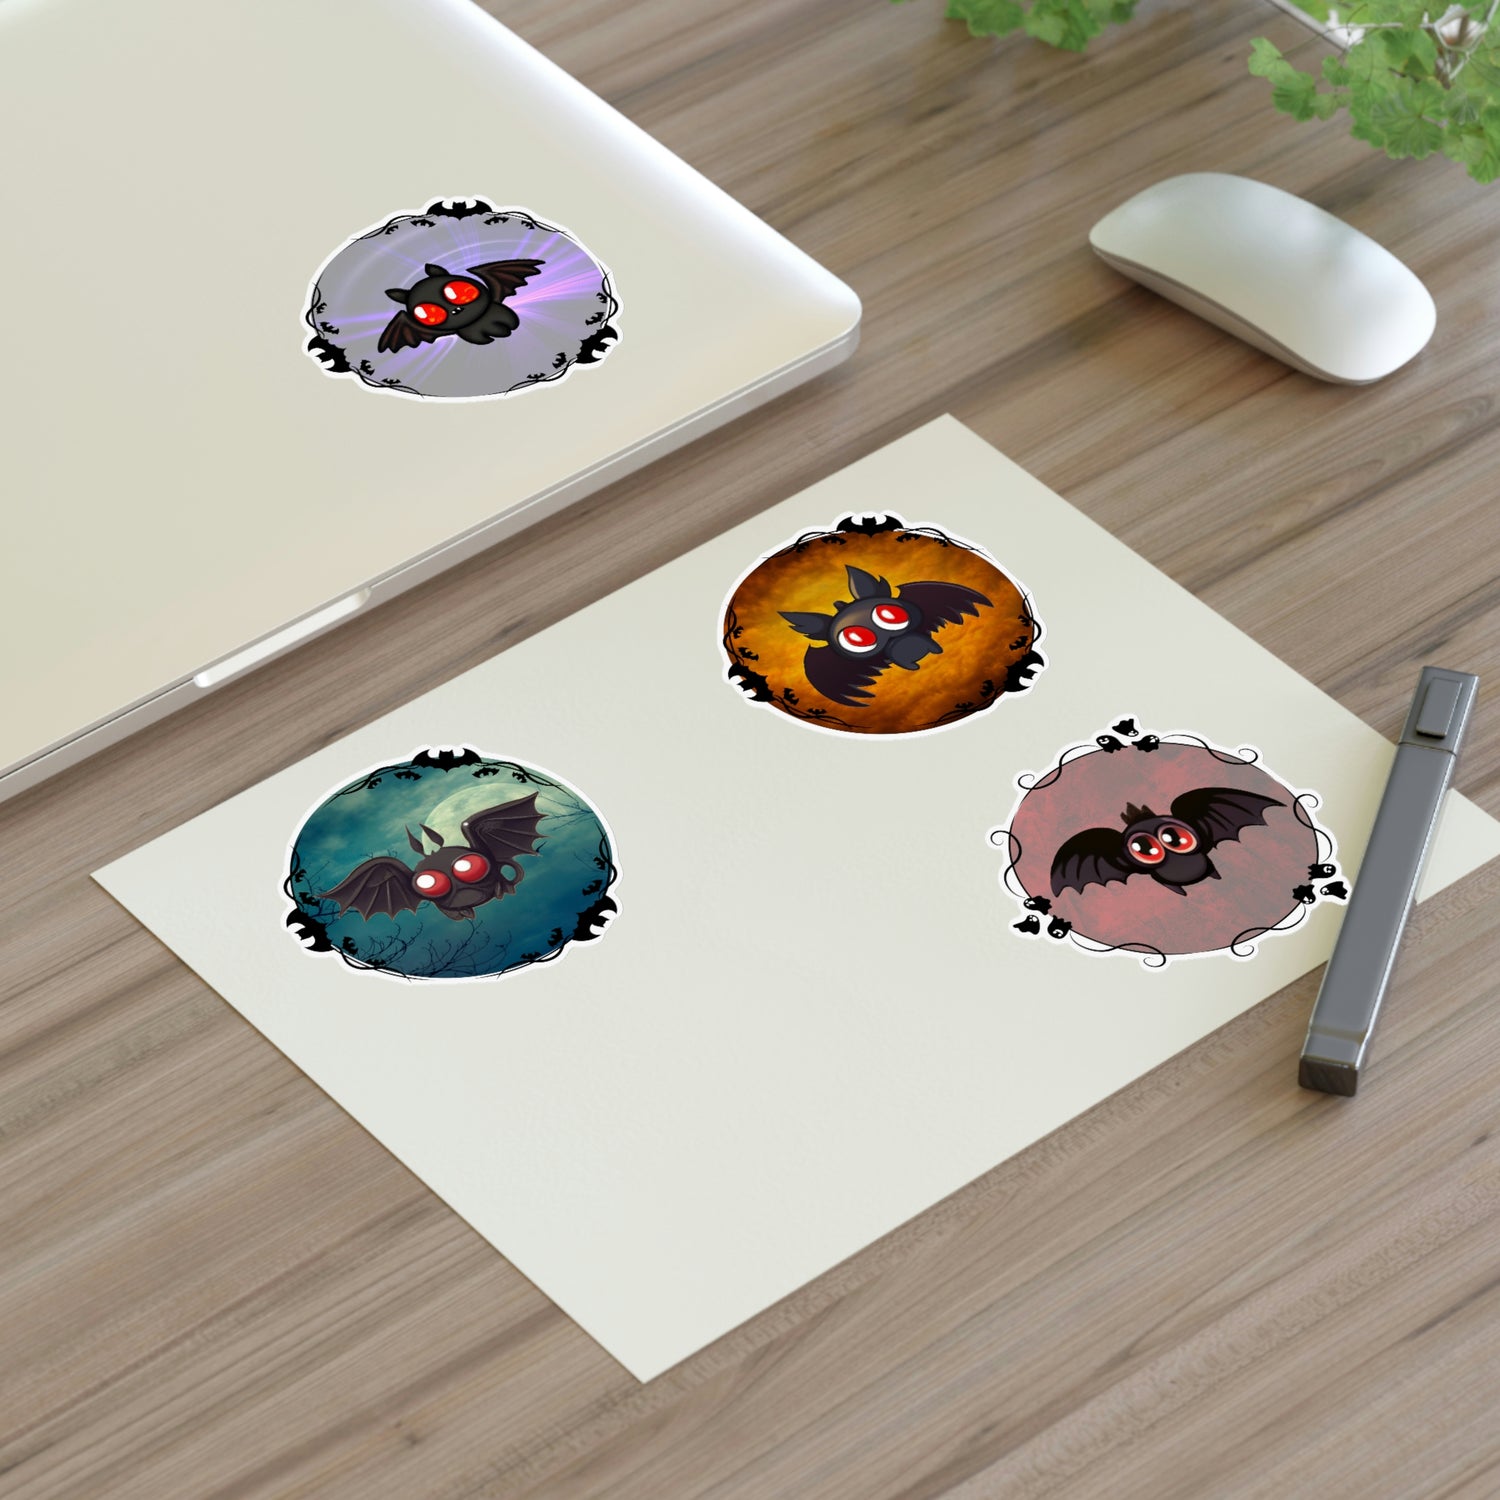 Adorable Pastel Goth Bat Demon Hell Spawn Sticker Sheet (set of 4) available in white or holographic! So Cute! Lord and Lady Towers